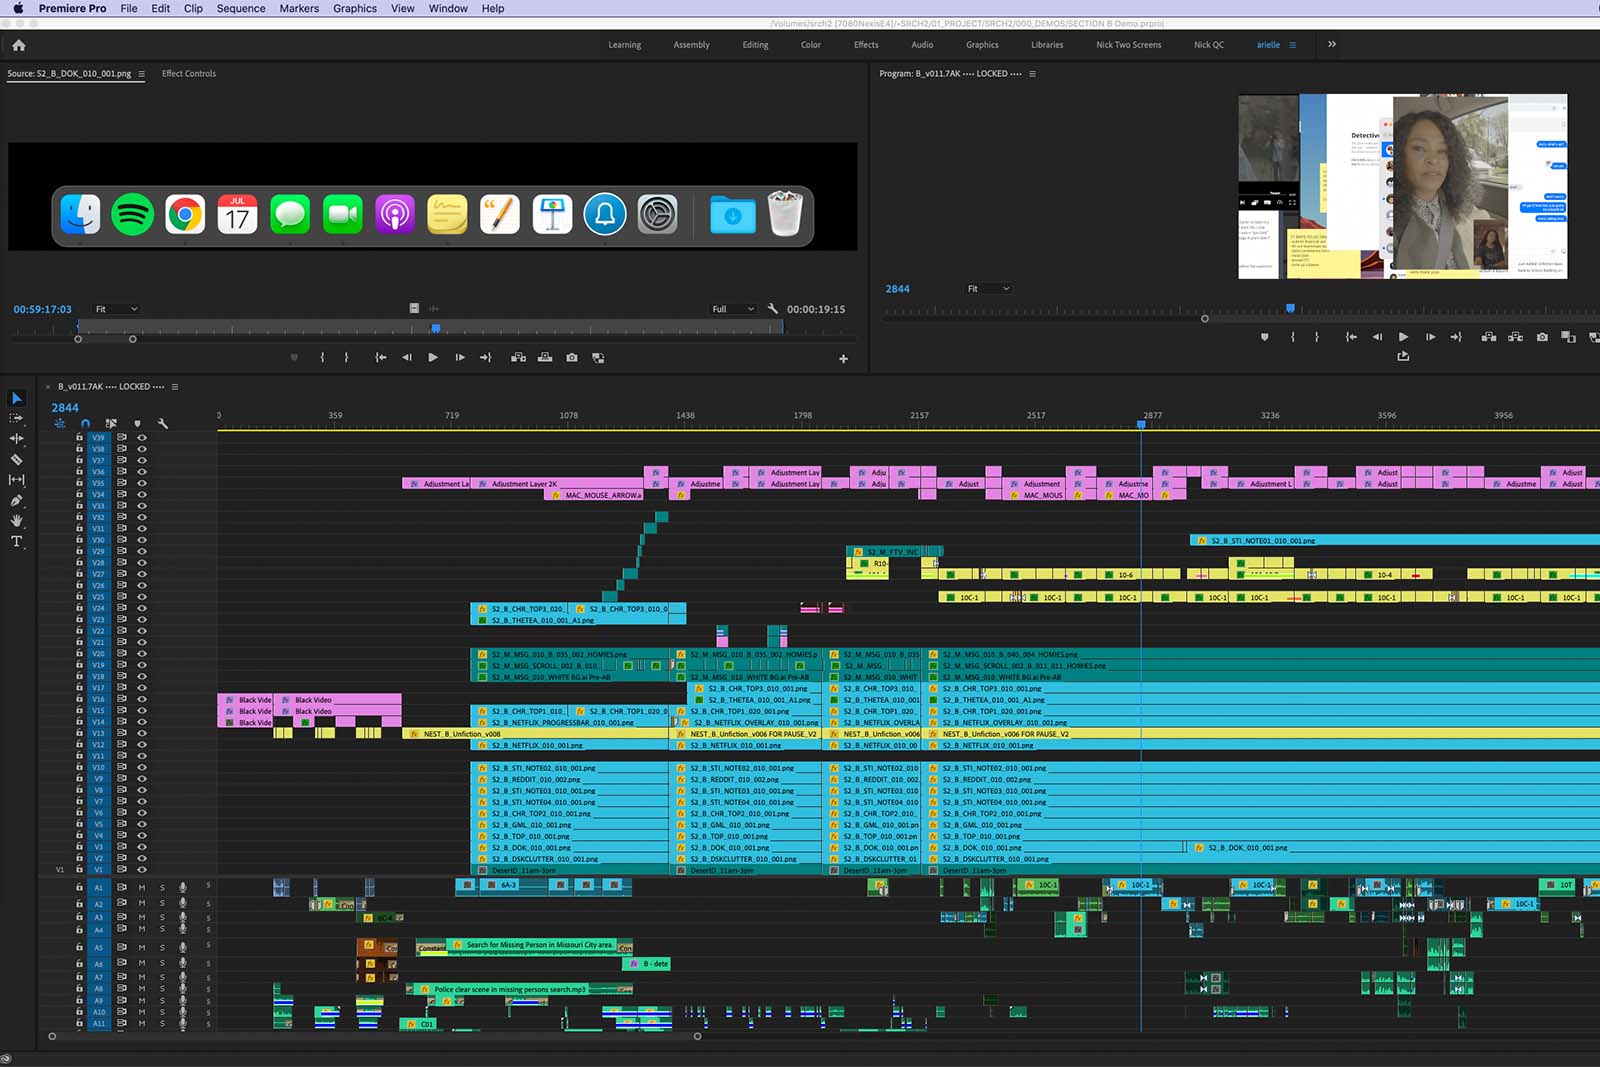 Cropped Premiere Pro workspace for Missing. Click here to view the full-size version.